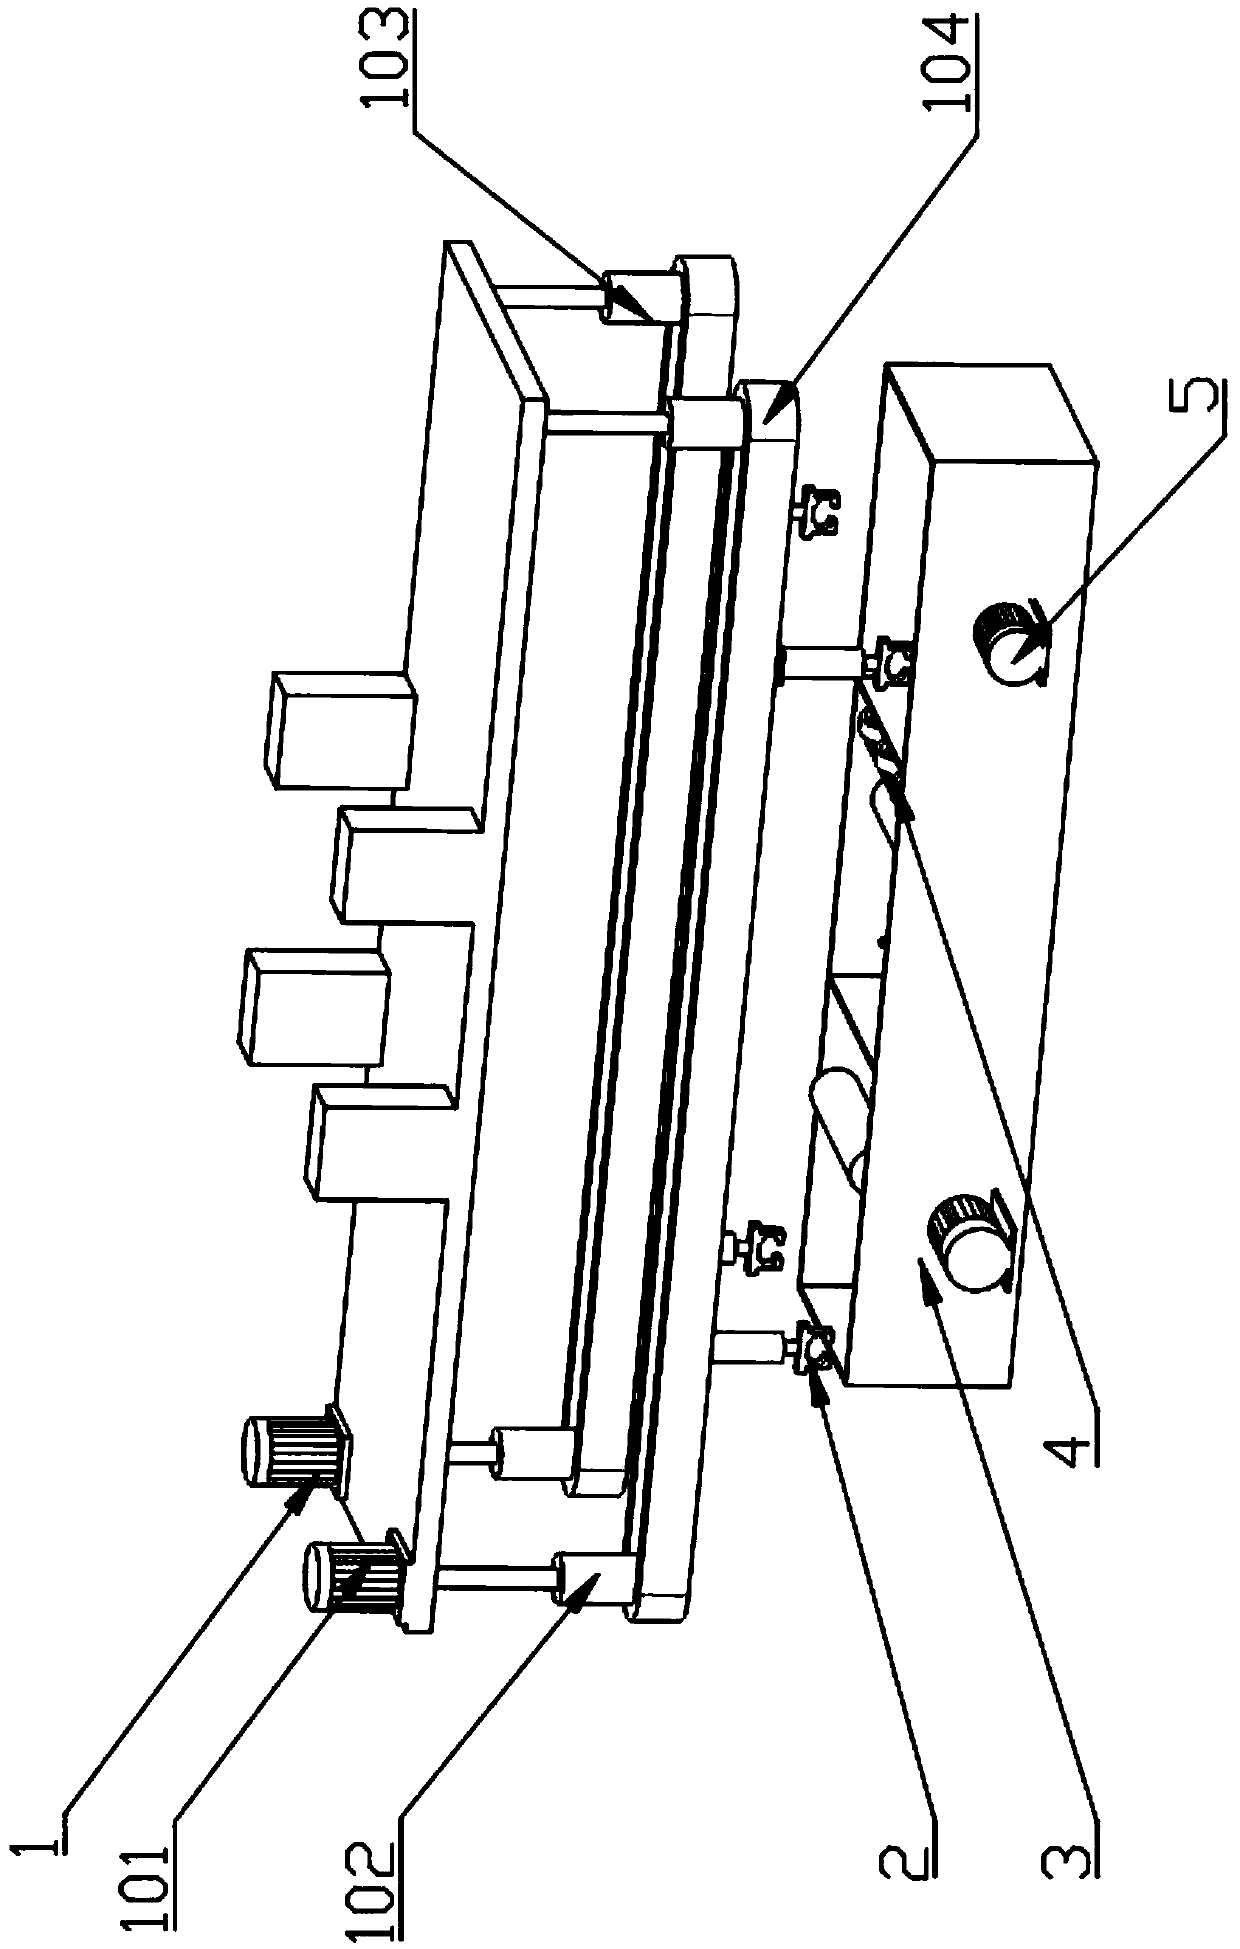 Rubber roller cleaning and laminating device